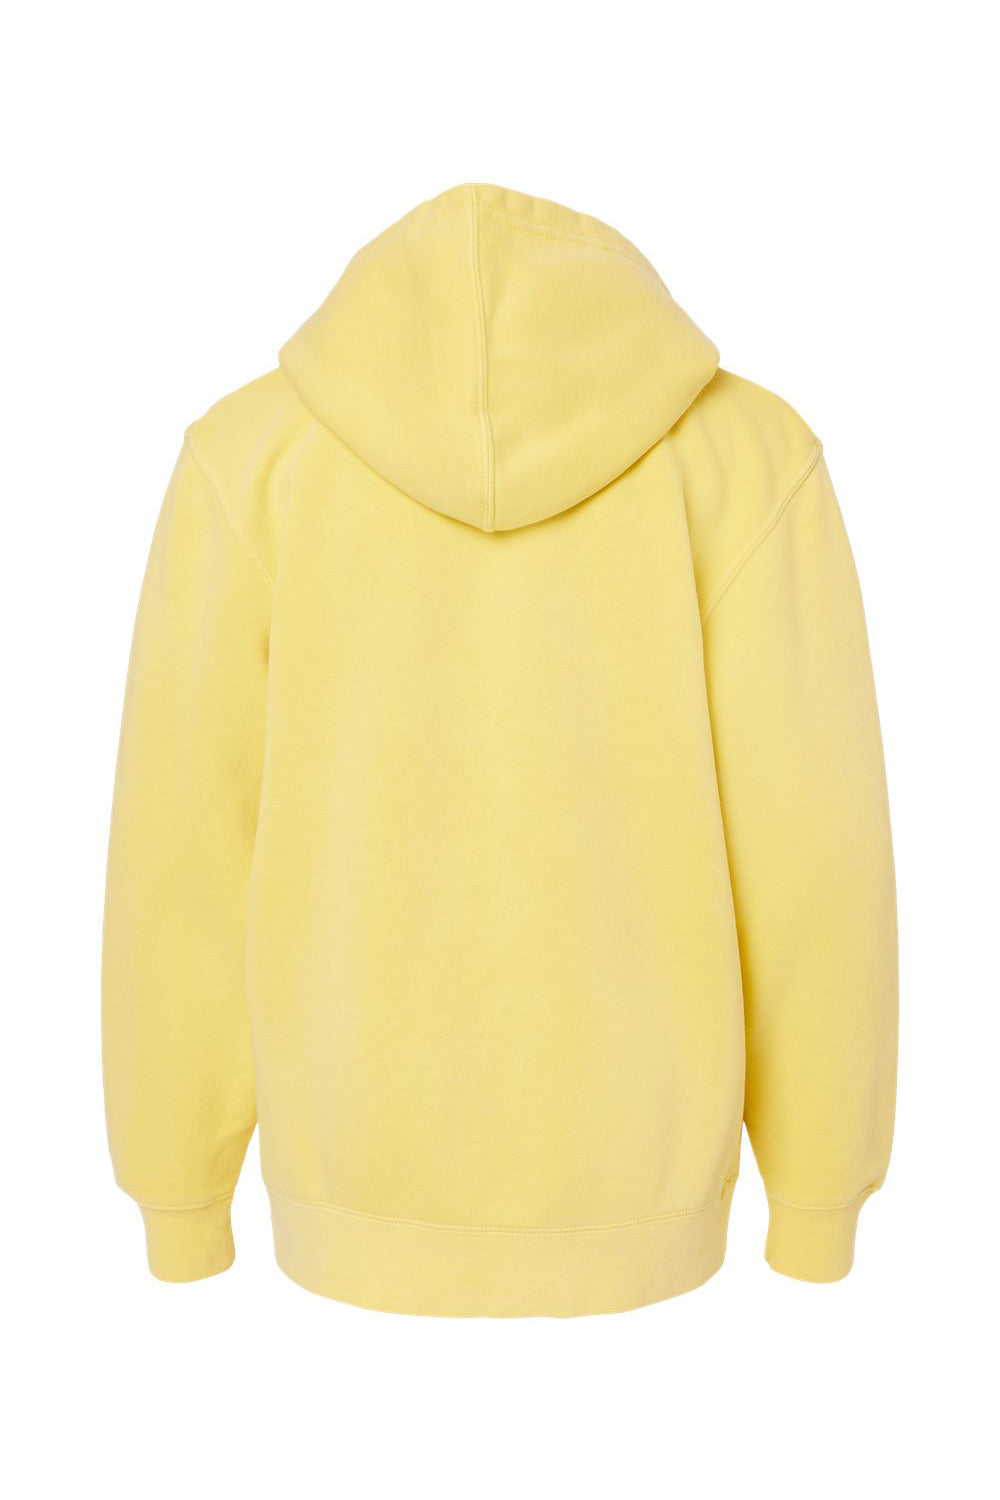 Independent Trading Co. PRM1500Y Youth Pigment Dyed Hooded Sweatshirt Hoodie Yellow Flat Back